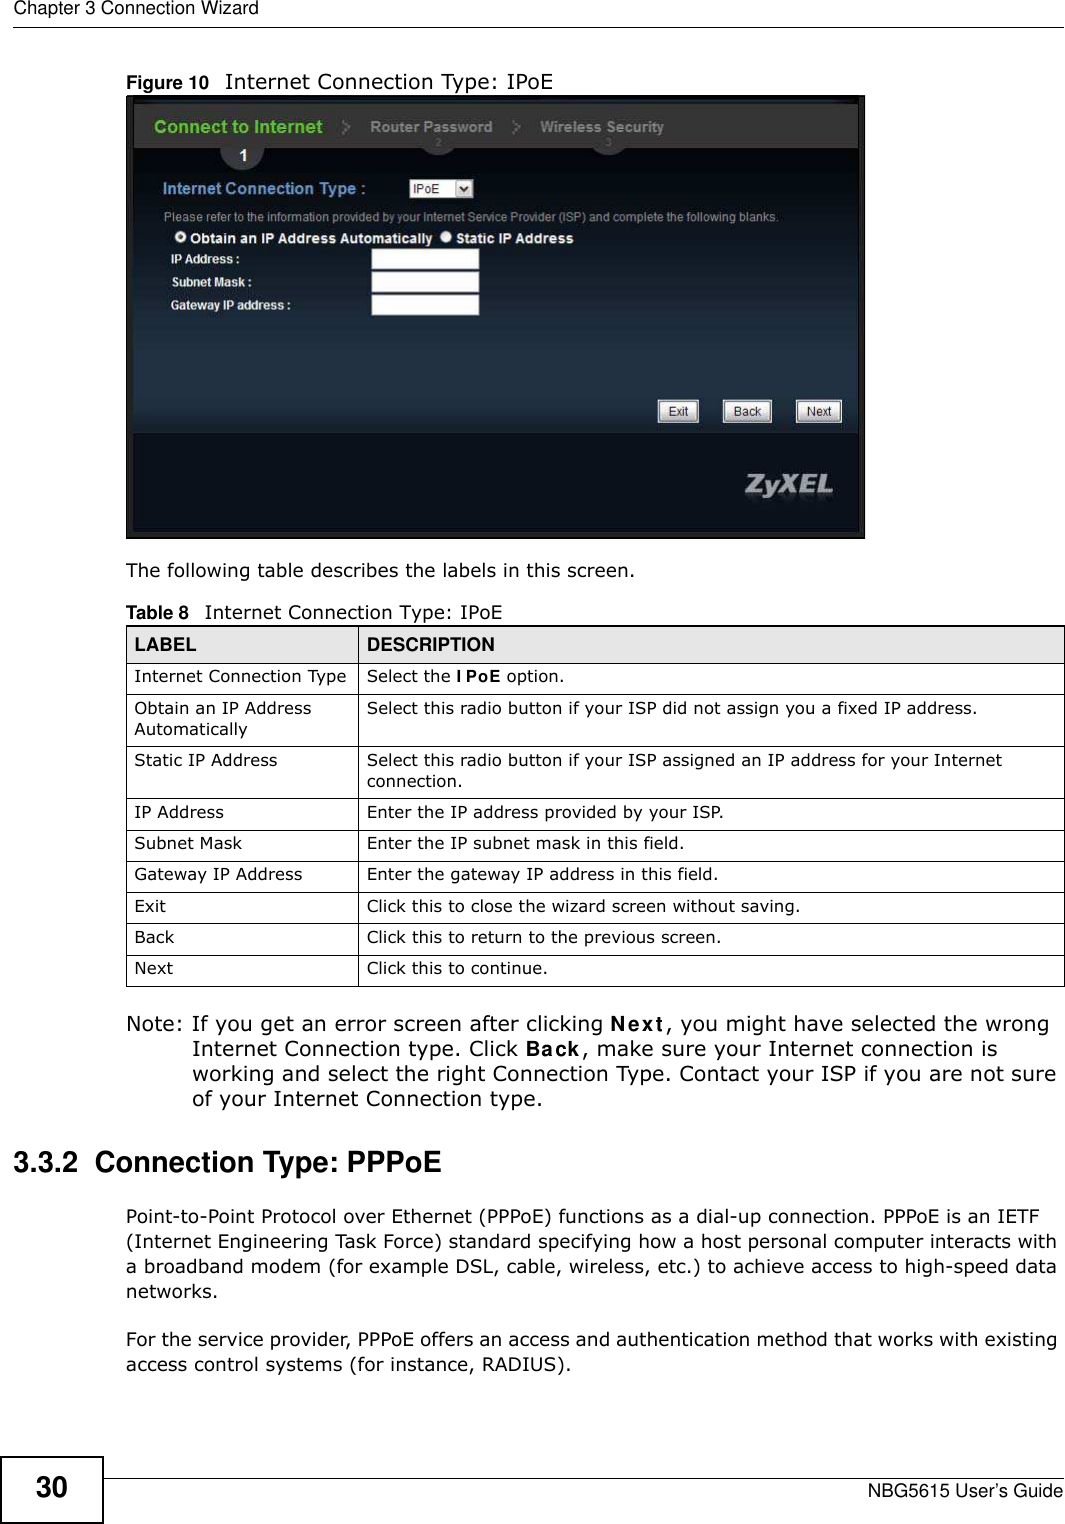 Chapter 3 Connection WizardNBG5615 User’s Guide30Figure 10   Internet Connection Type: IPoE The following table describes the labels in this screen.  Note: If you get an error screen after clicking Next, you might have selected the wrong Internet Connection type. Click Back, make sure your Internet connection is working and select the right Connection Type. Contact your ISP if you are not sure of your Internet Connection type.3.3.2  Connection Type: PPPoEPoint-to-Point Protocol over Ethernet (PPPoE) functions as a dial-up connection. PPPoE is an IETF (Internet Engineering Task Force) standard specifying how a host personal computer interacts with a broadband modem (for example DSL, cable, wireless, etc.) to achieve access to high-speed data networks.For the service provider, PPPoE offers an access and authentication method that works with existing access control systems (for instance, RADIUS). Table 8   Internet Connection Type: IPoELABEL DESCRIPTIONInternet Connection Type Select the I PoE option.Obtain an IP Address AutomaticallySelect this radio button if your ISP did not assign you a fixed IP address.Static IP Address Select this radio button if your ISP assigned an IP address for your Internet connection.IP Address Enter the IP address provided by your ISP.Subnet Mask Enter the IP subnet mask in this field.Gateway IP Address Enter the gateway IP address in this field.Exit Click this to close the wizard screen without saving.Back Click this to return to the previous screen.Next Click this to continue. 